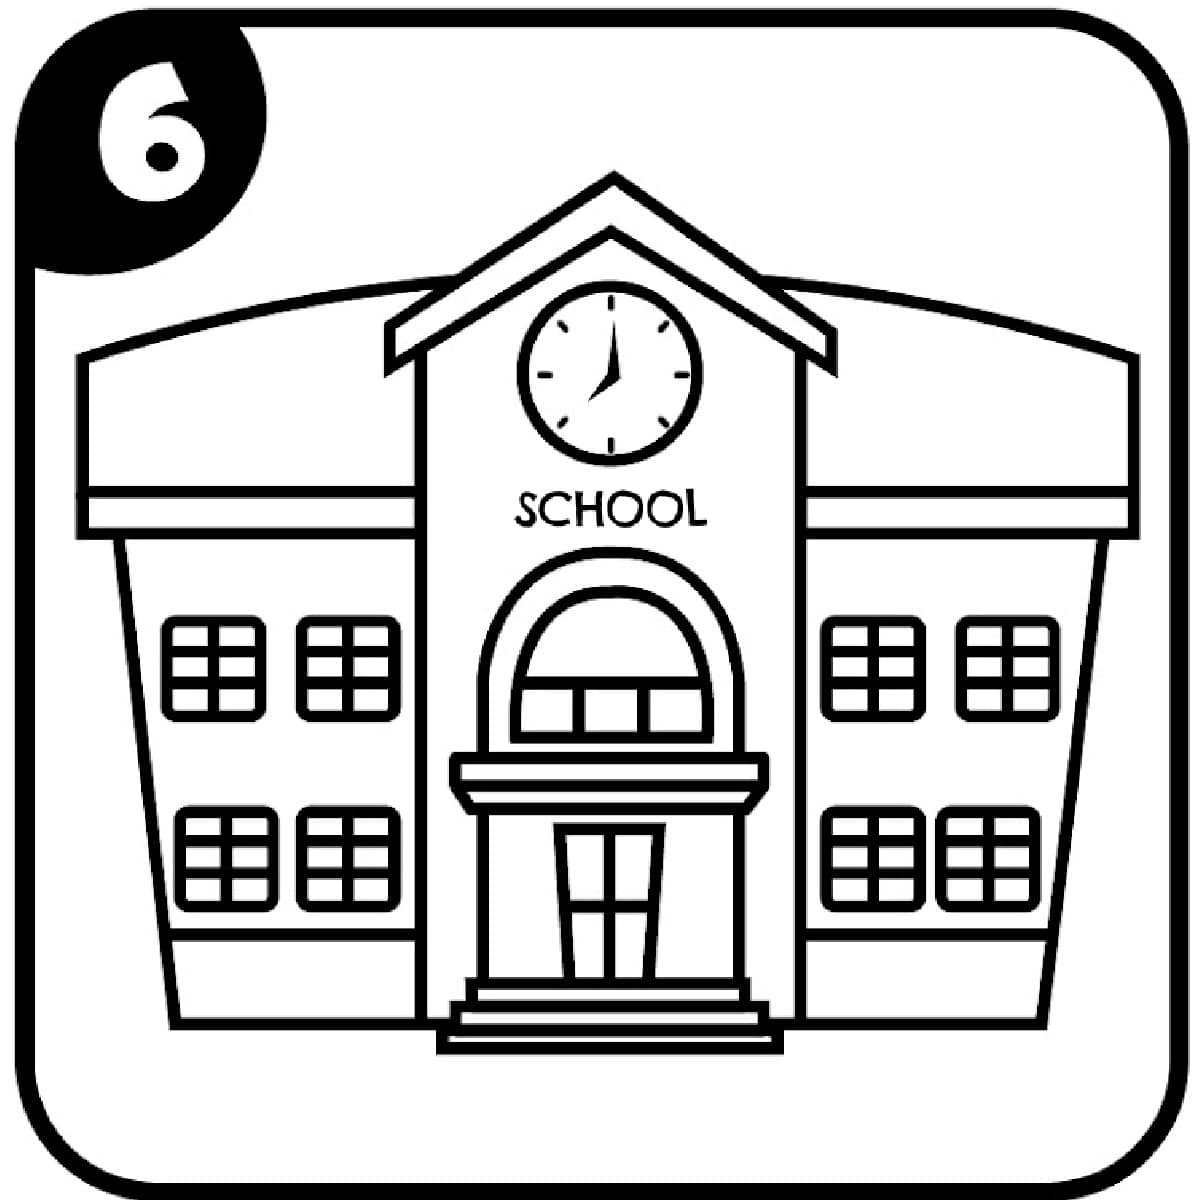 step 6 how to draw a school